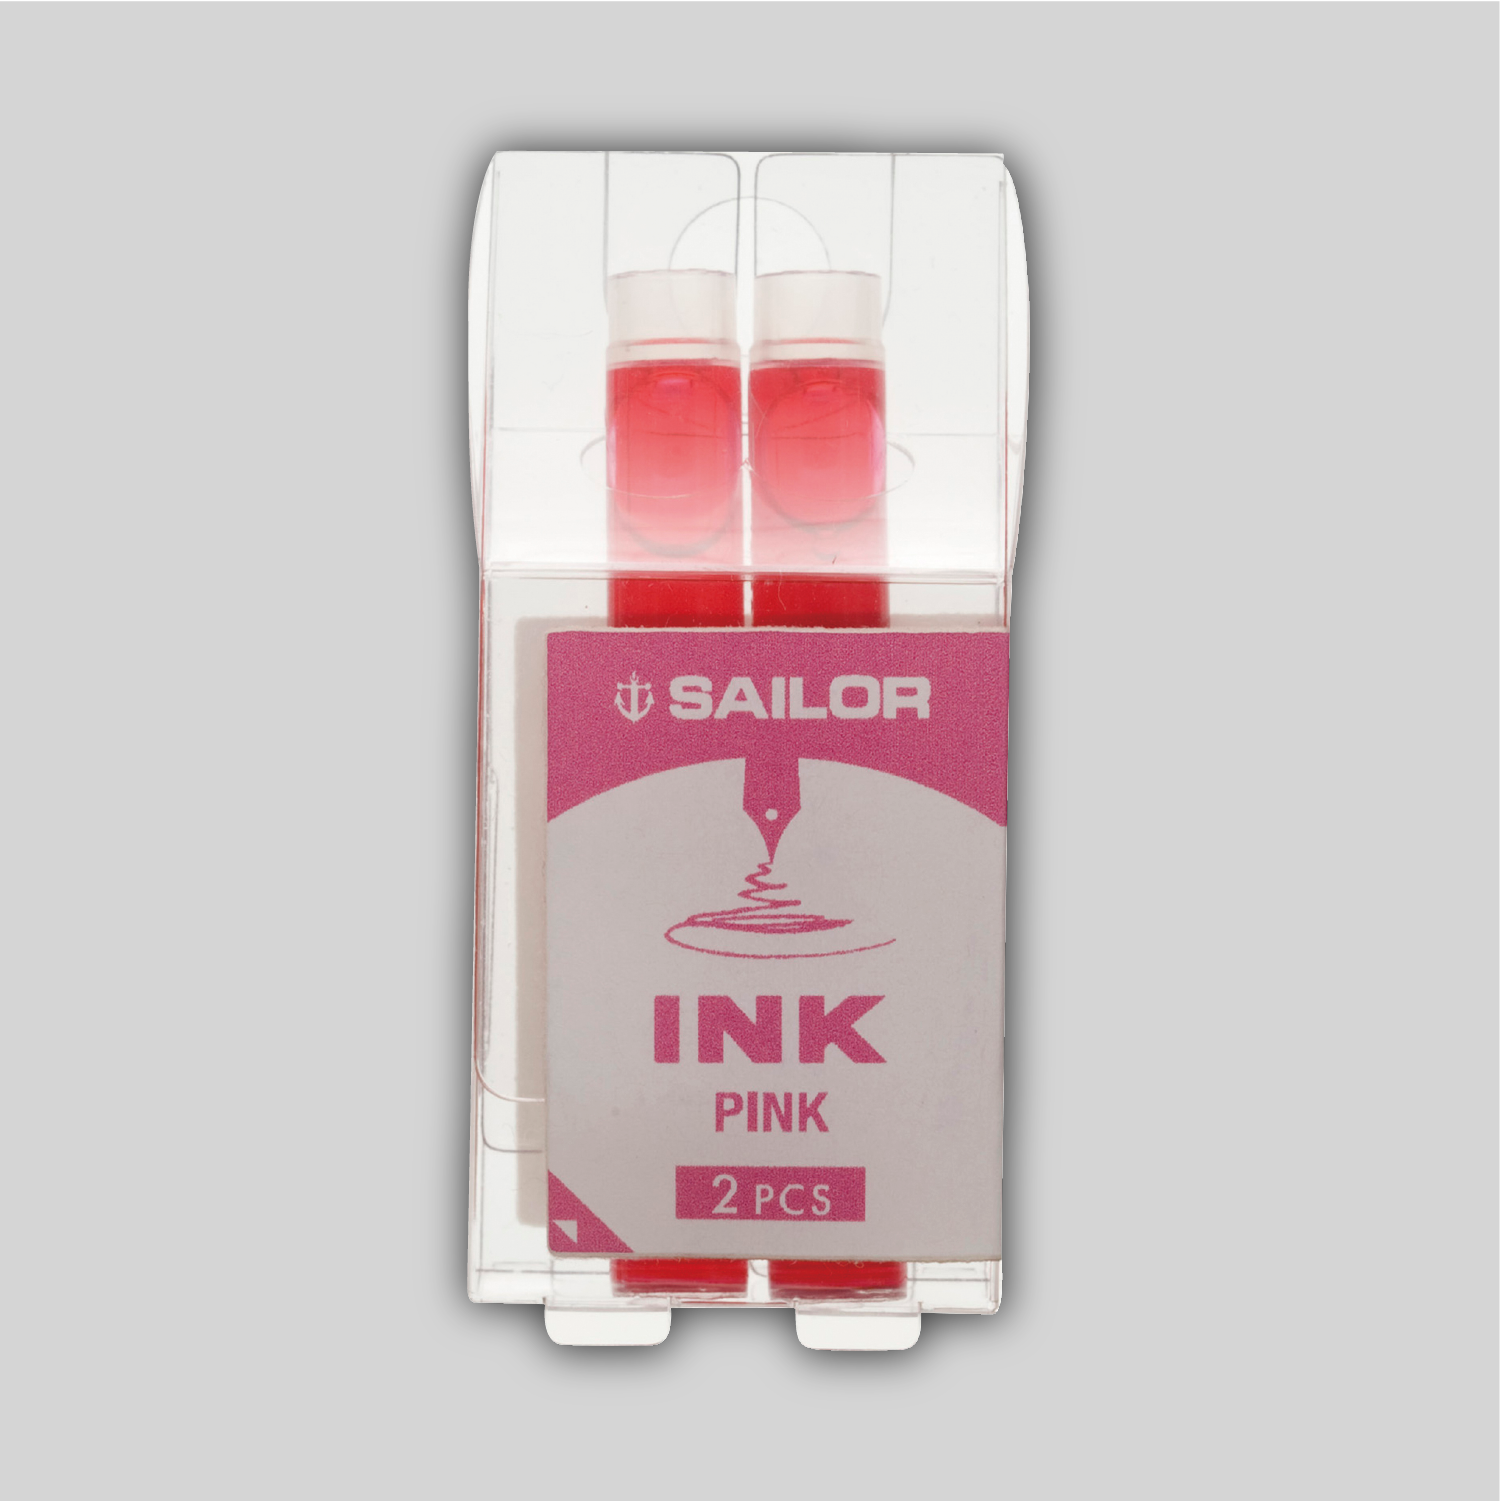 Two pink ink cartridges in a package.